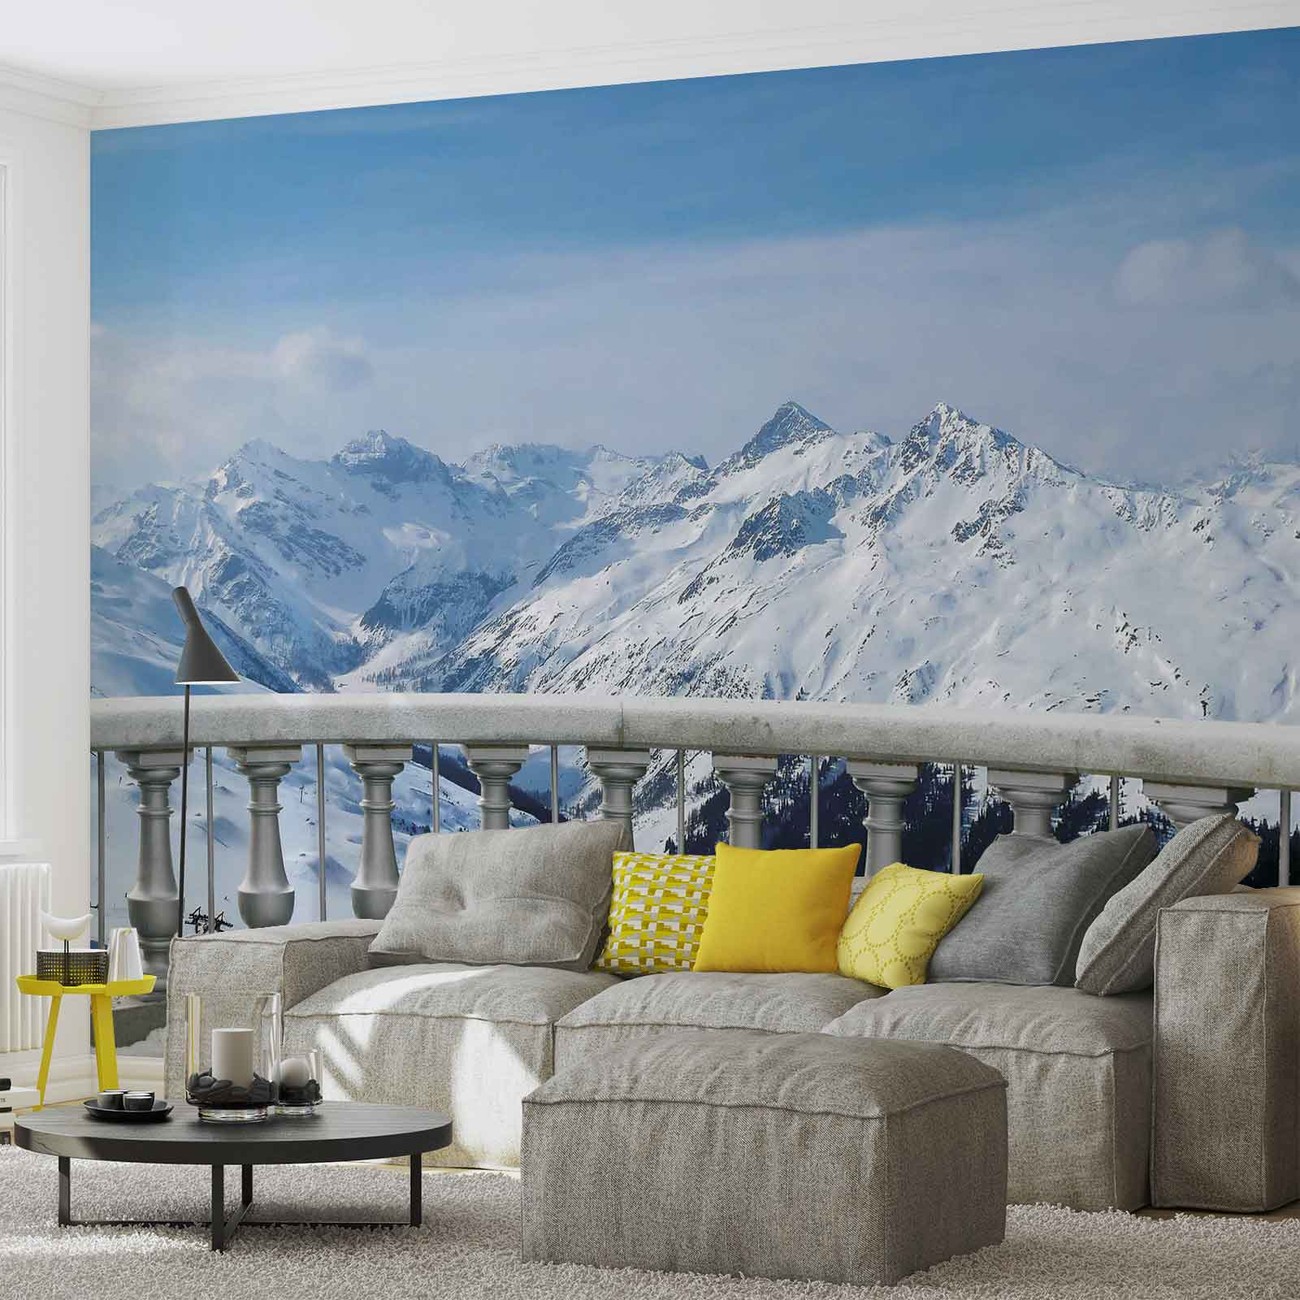 Mountain Scene Wall Paper Mural | Buy at UKposters